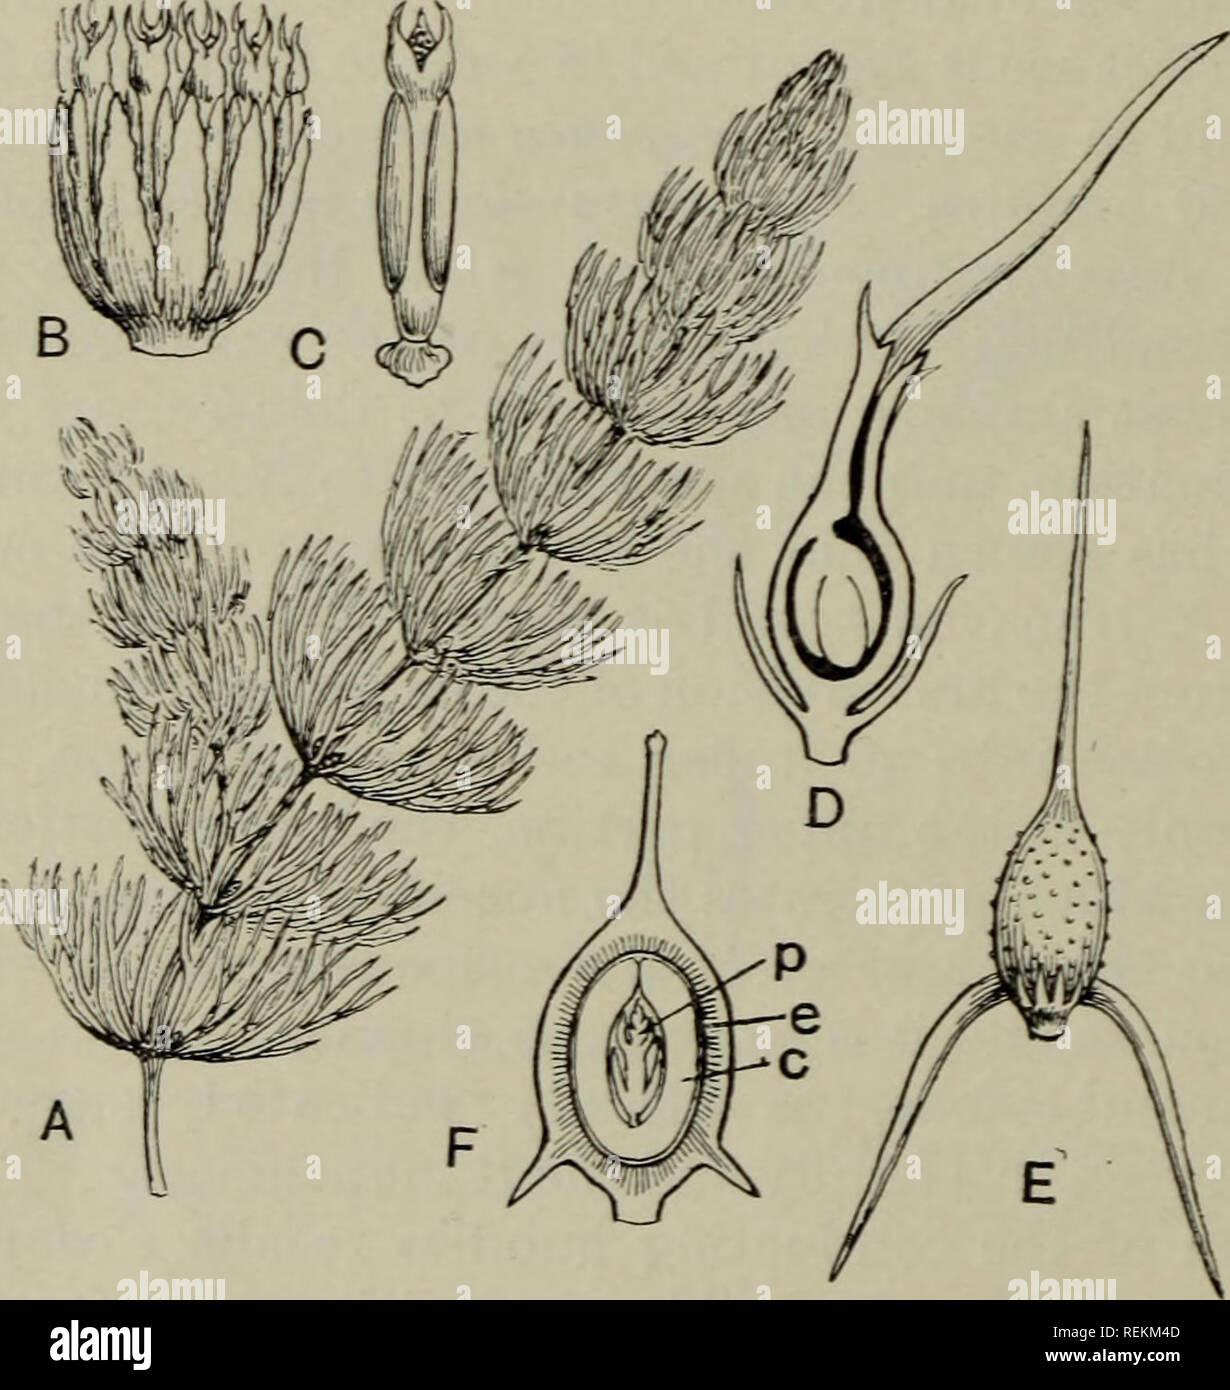 . The classification of flowering plants. Plants. 162 FLOWERIXG PLAXTS (2) Lyon, H. L. &quot;Observations on the Embryogeny of Selumho.'&quot; Min- nesota Botanical Studies, n, 643 (1901). (3) Cook, M. T. Bull. Torrey Botan. Club, xxix, 211 (1902). See also Conard, H. S. &quot;The Waterhlies. A Monograph of the genus Nymphaea.'' Carnegie Institution, Washi?igton, 1905. Family XII. CERATOPHYLLACEAE A small family containing one genus, Cer.atopliyllum, with three species of rootless submerged water-plants with whorls of simple much dissected leaves and miisexual flowers. The hjrpogynous perianth Stock Photo